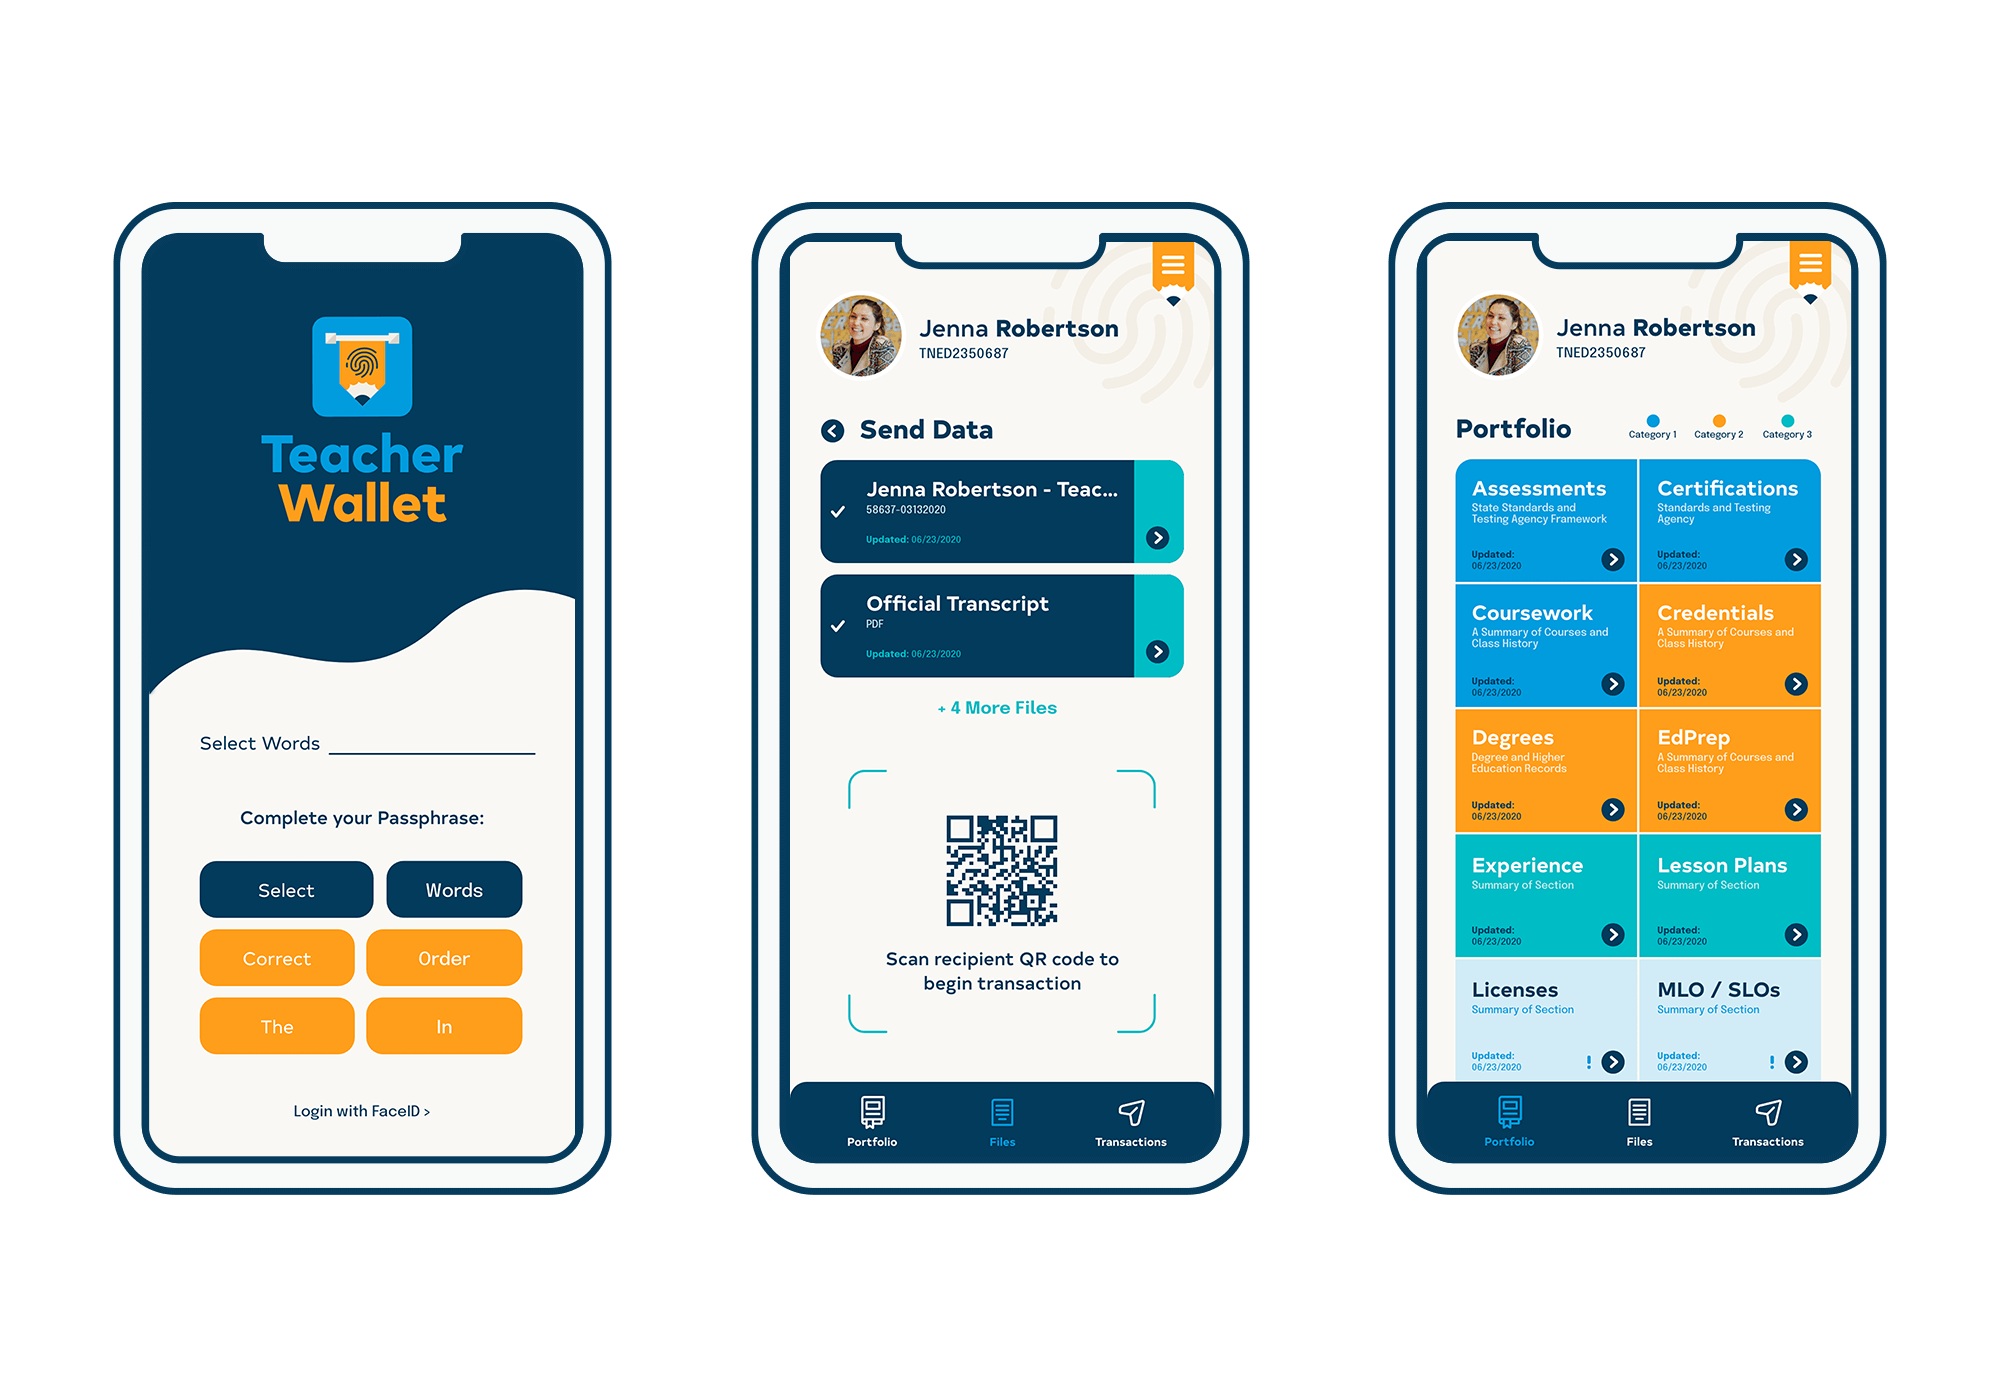 Three phones showing different screens from the Teacher Wallet application